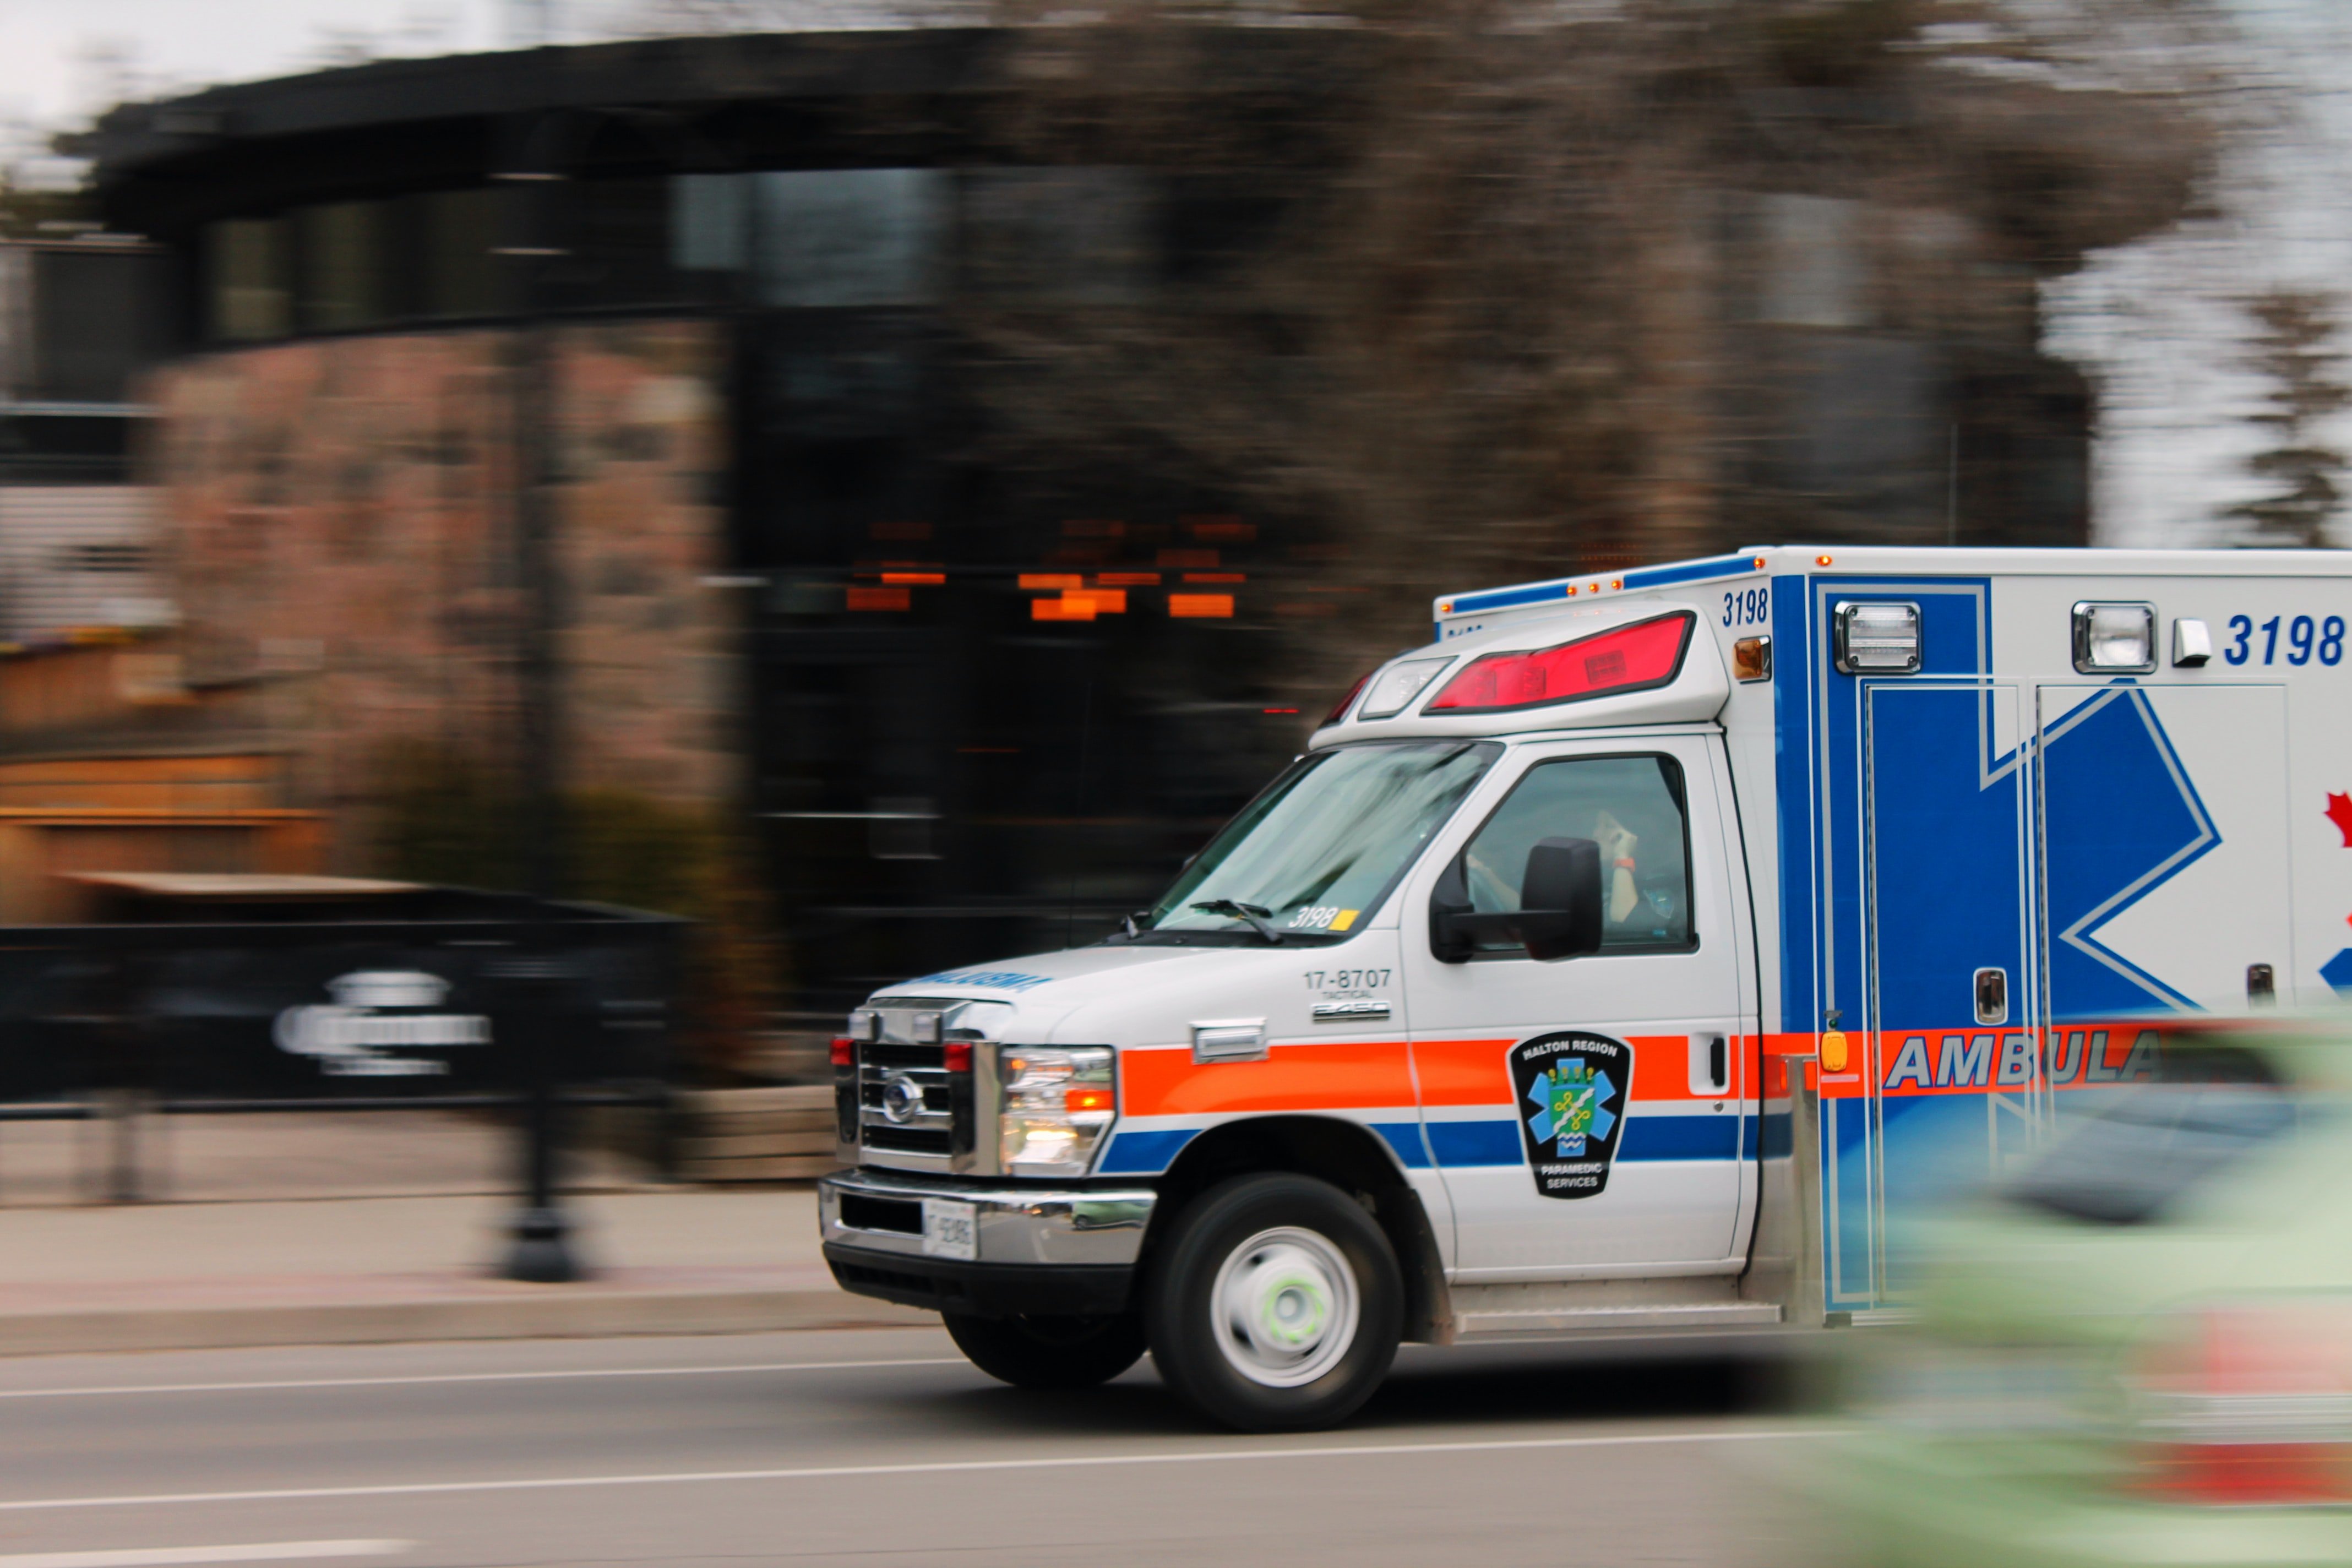 Dorothy was rushed to the hospital in an ambulance. | Source: Unsplash